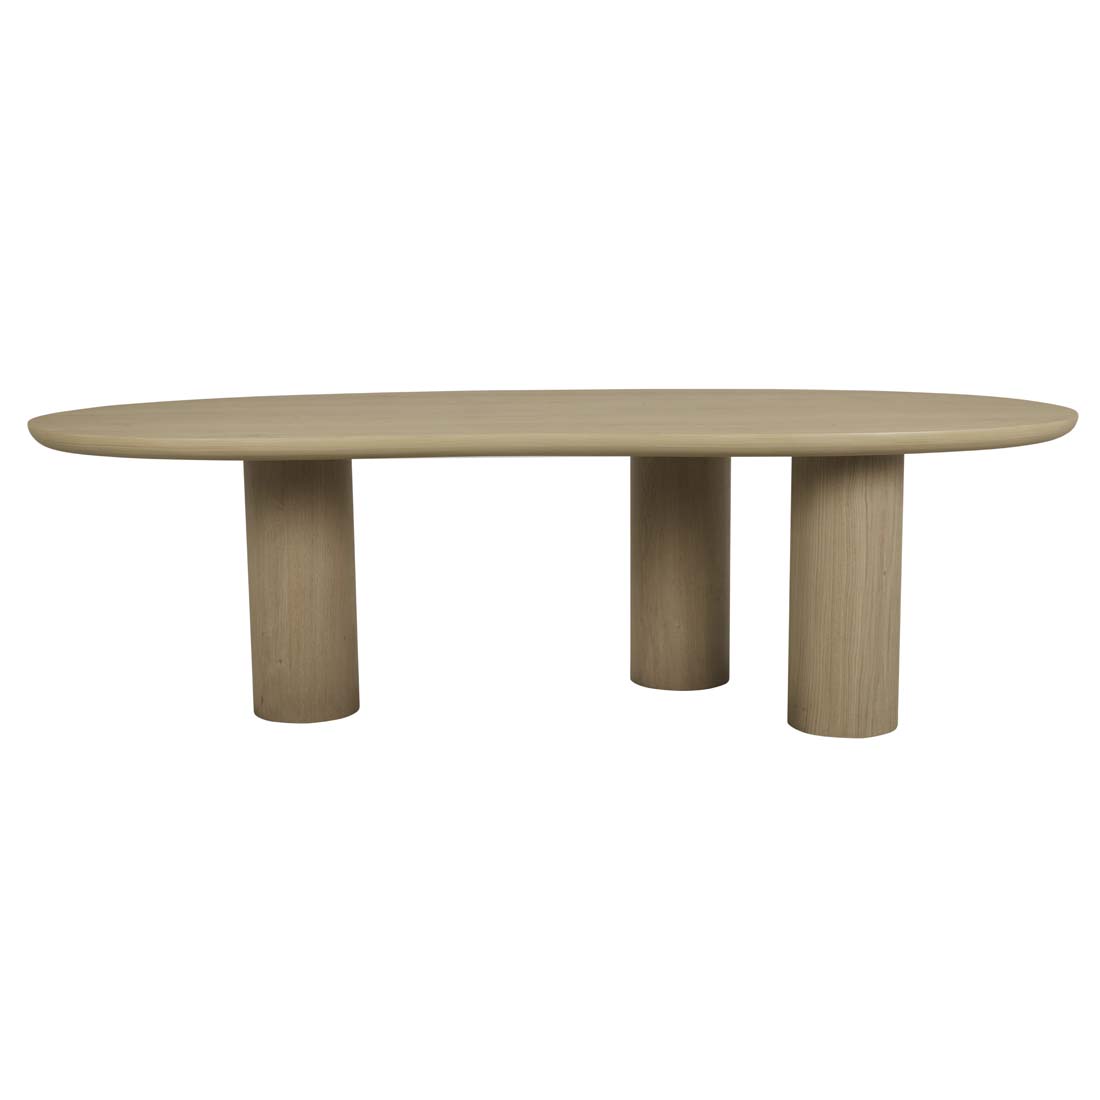 Seb Curve 8 Seater Dining Table image 8